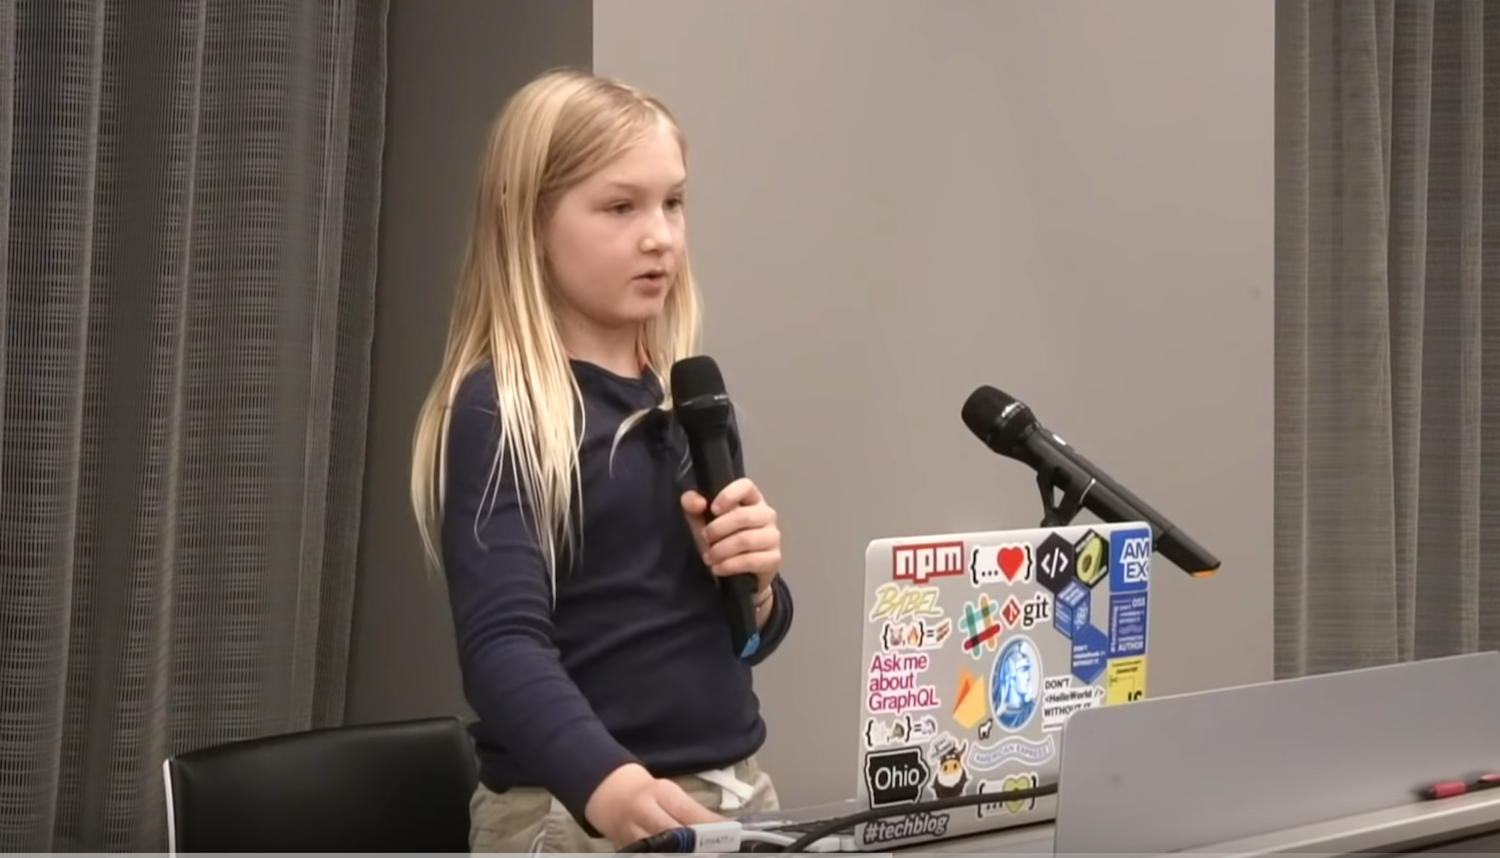 9 Year Old Shares his Journey Learning React